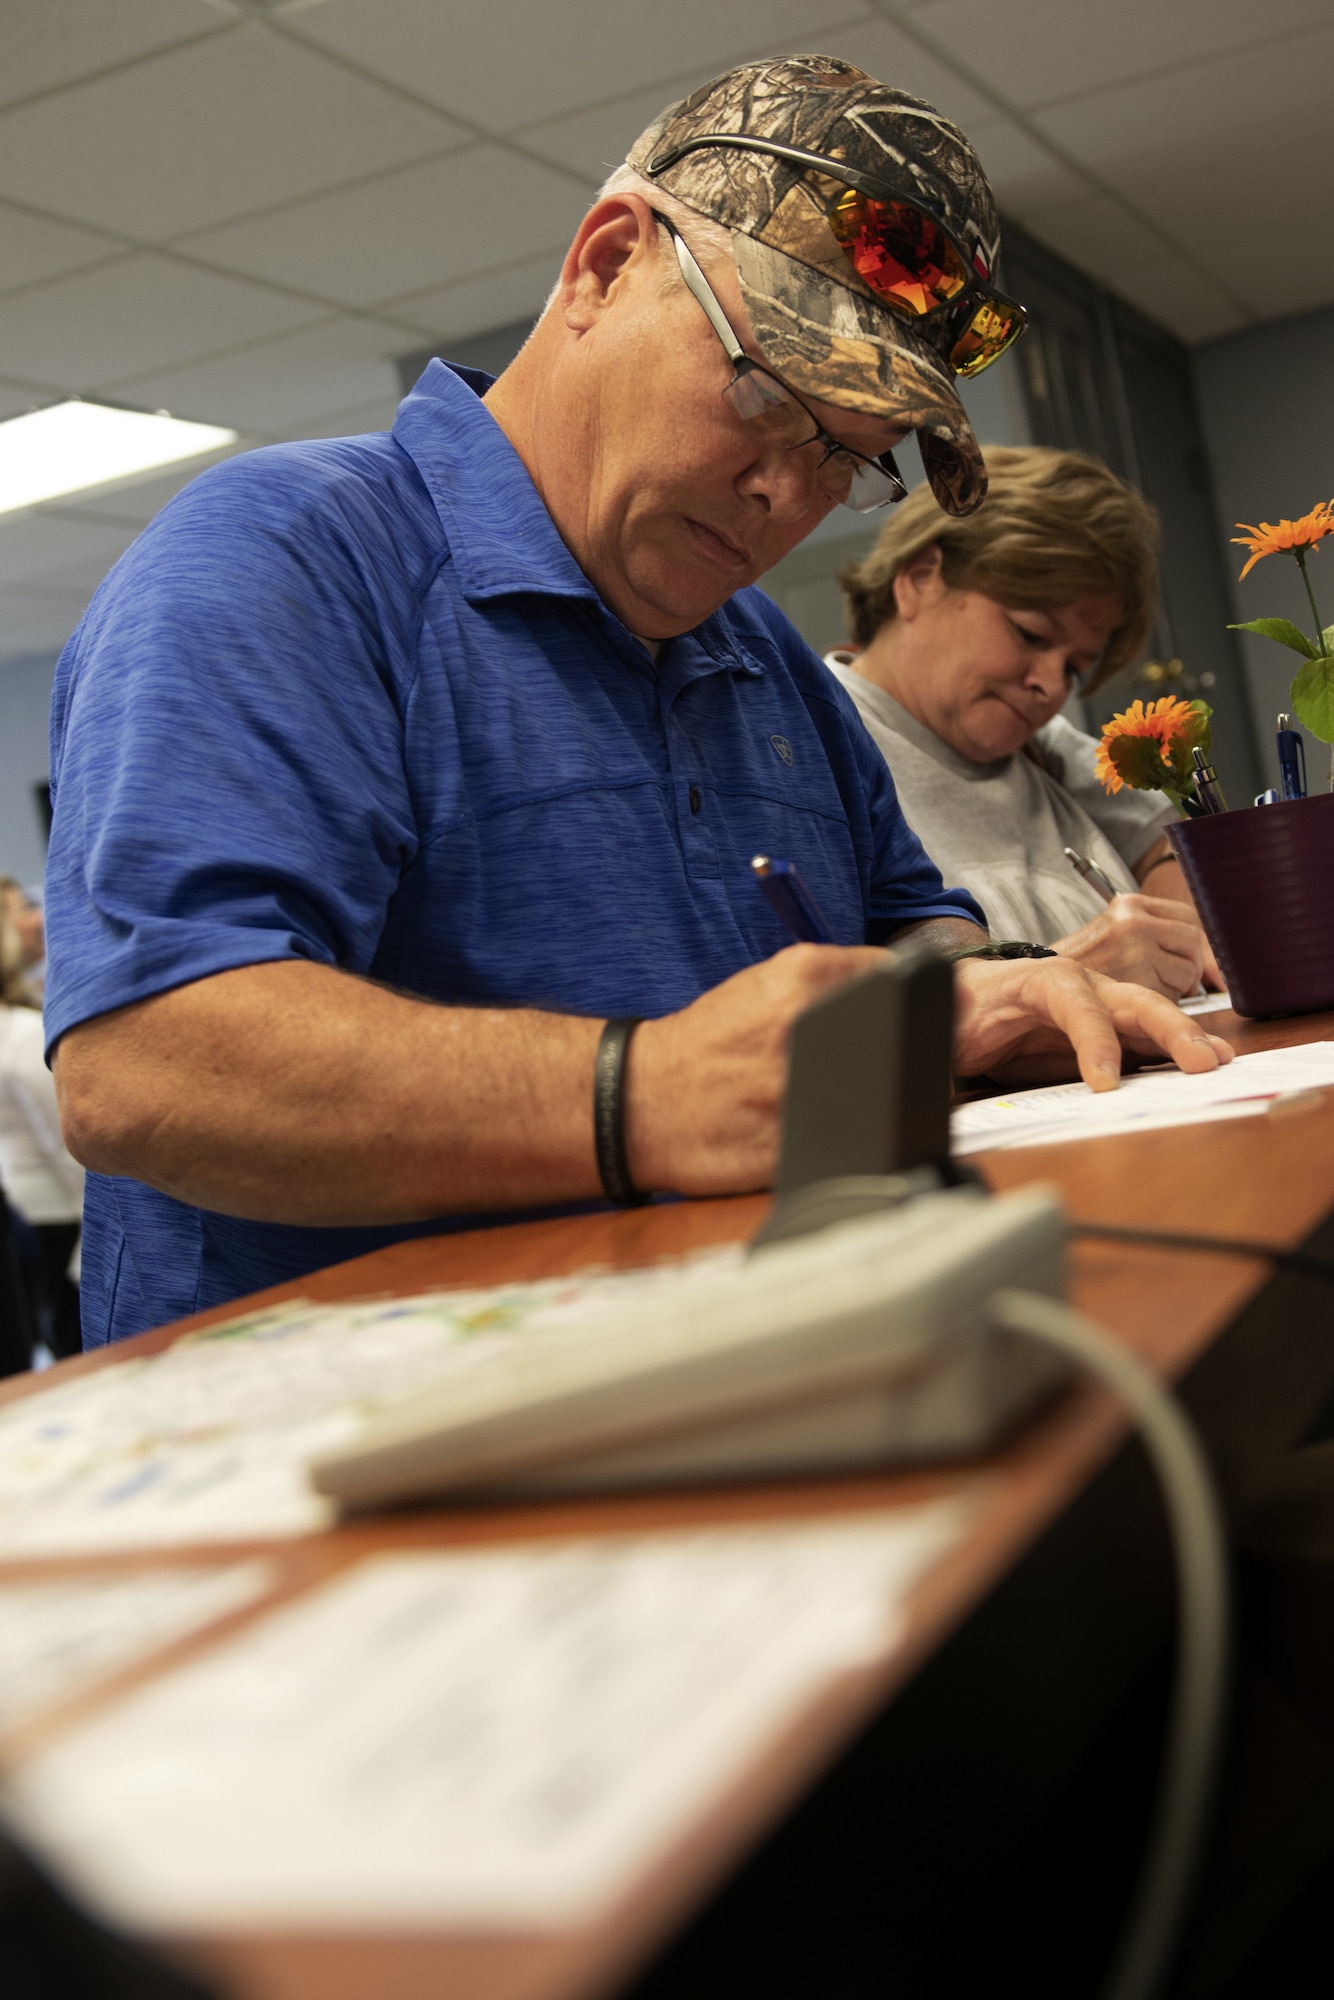 Brian and Donna "Denise" Bradford, parents of Airman 1st Class Brain Bradford, sign to receive an Air Force Family Forever member ID card in the Biloxi Visitors Center at Keesler Air Force Base, Mississippi, April 23, 2019. Brian died while participating in a training exercise at Ramstein Air Base, Germany. As surviving parents of a service member, Michael and Donna obtained an ID card for recognition and installation access so they can attend events and access Airman and Family Readiness Center referral services. (U.S. Air Force photo by Airman Seth Haddix)